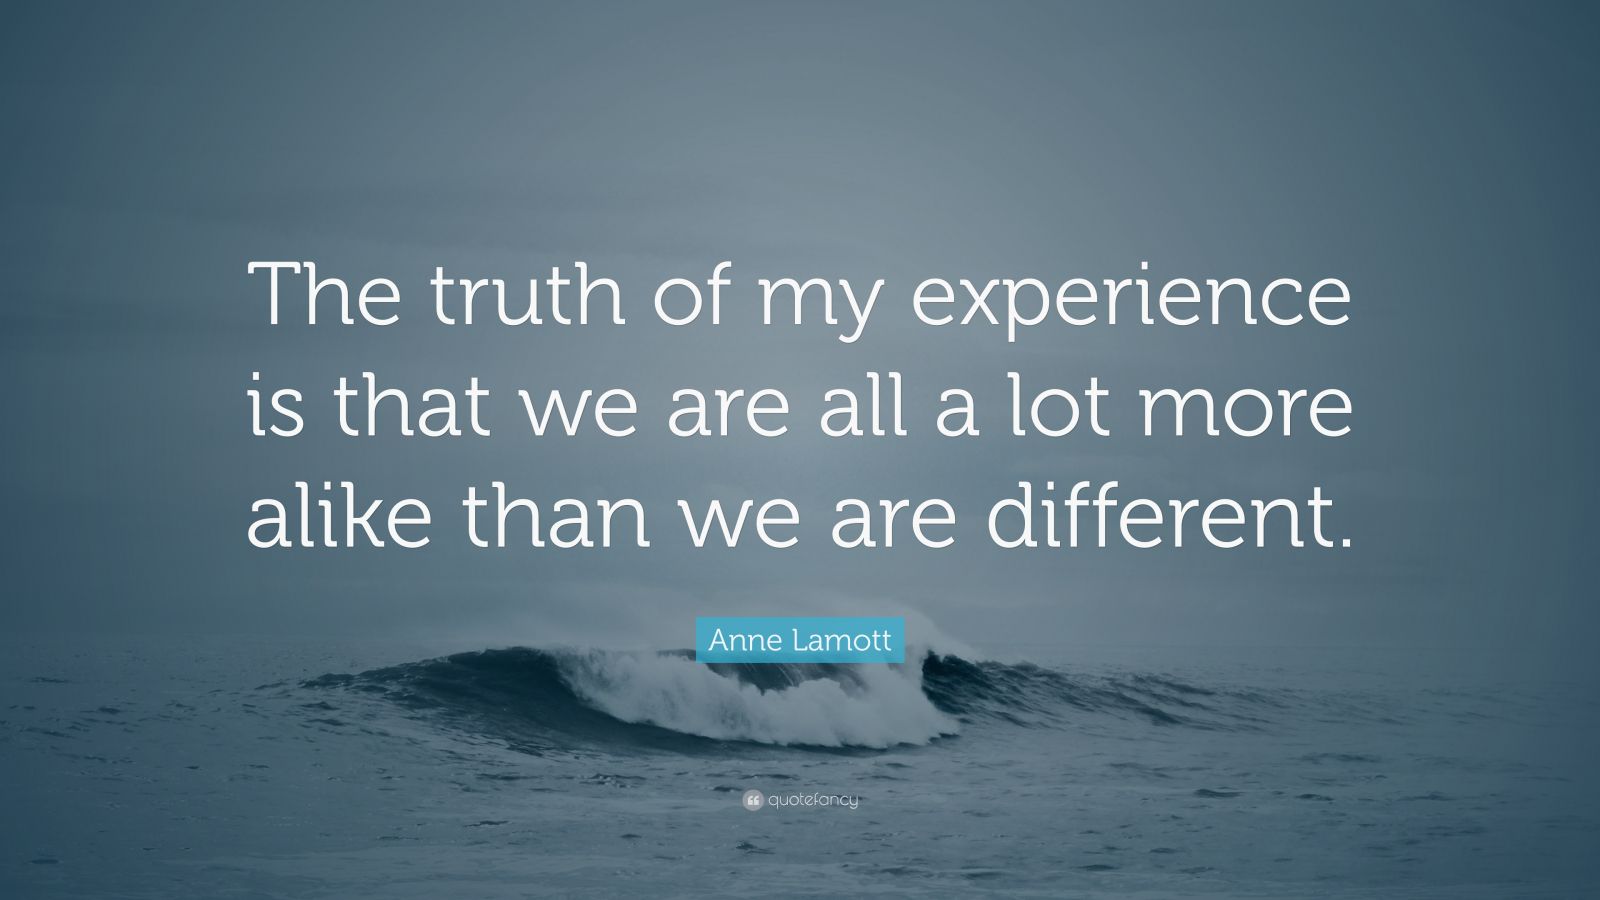 Anne Lamott Quote: "The truth of my experience is that we are all a lot more alike than we are ...